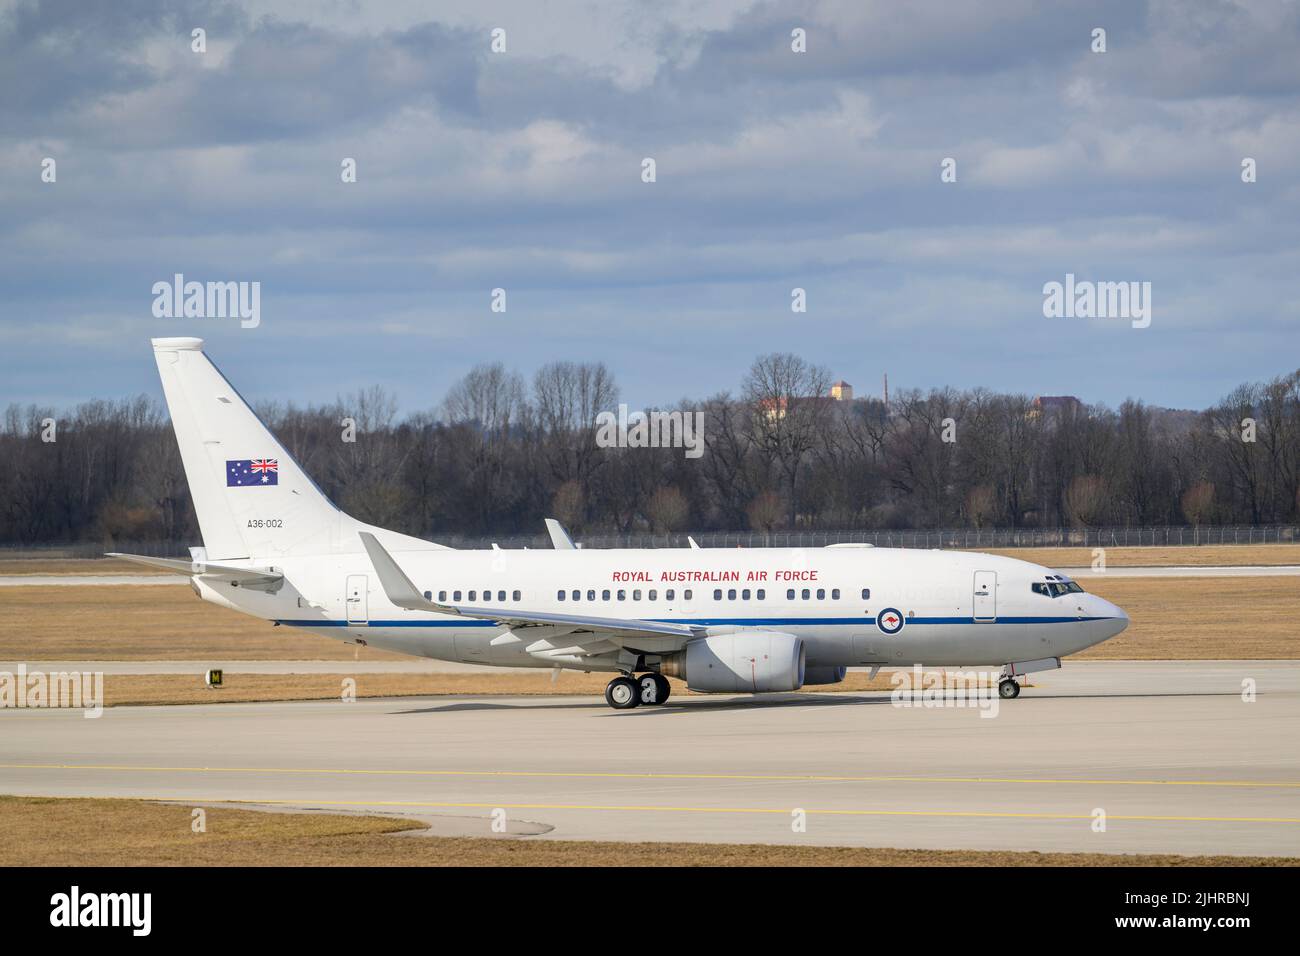 Munich, Germany - February 20. 2022 : Royal Australian Air Force Boeing 737-700 BBJ with the aircraft registration A36-002 is taxiing for take off on Stock Photo